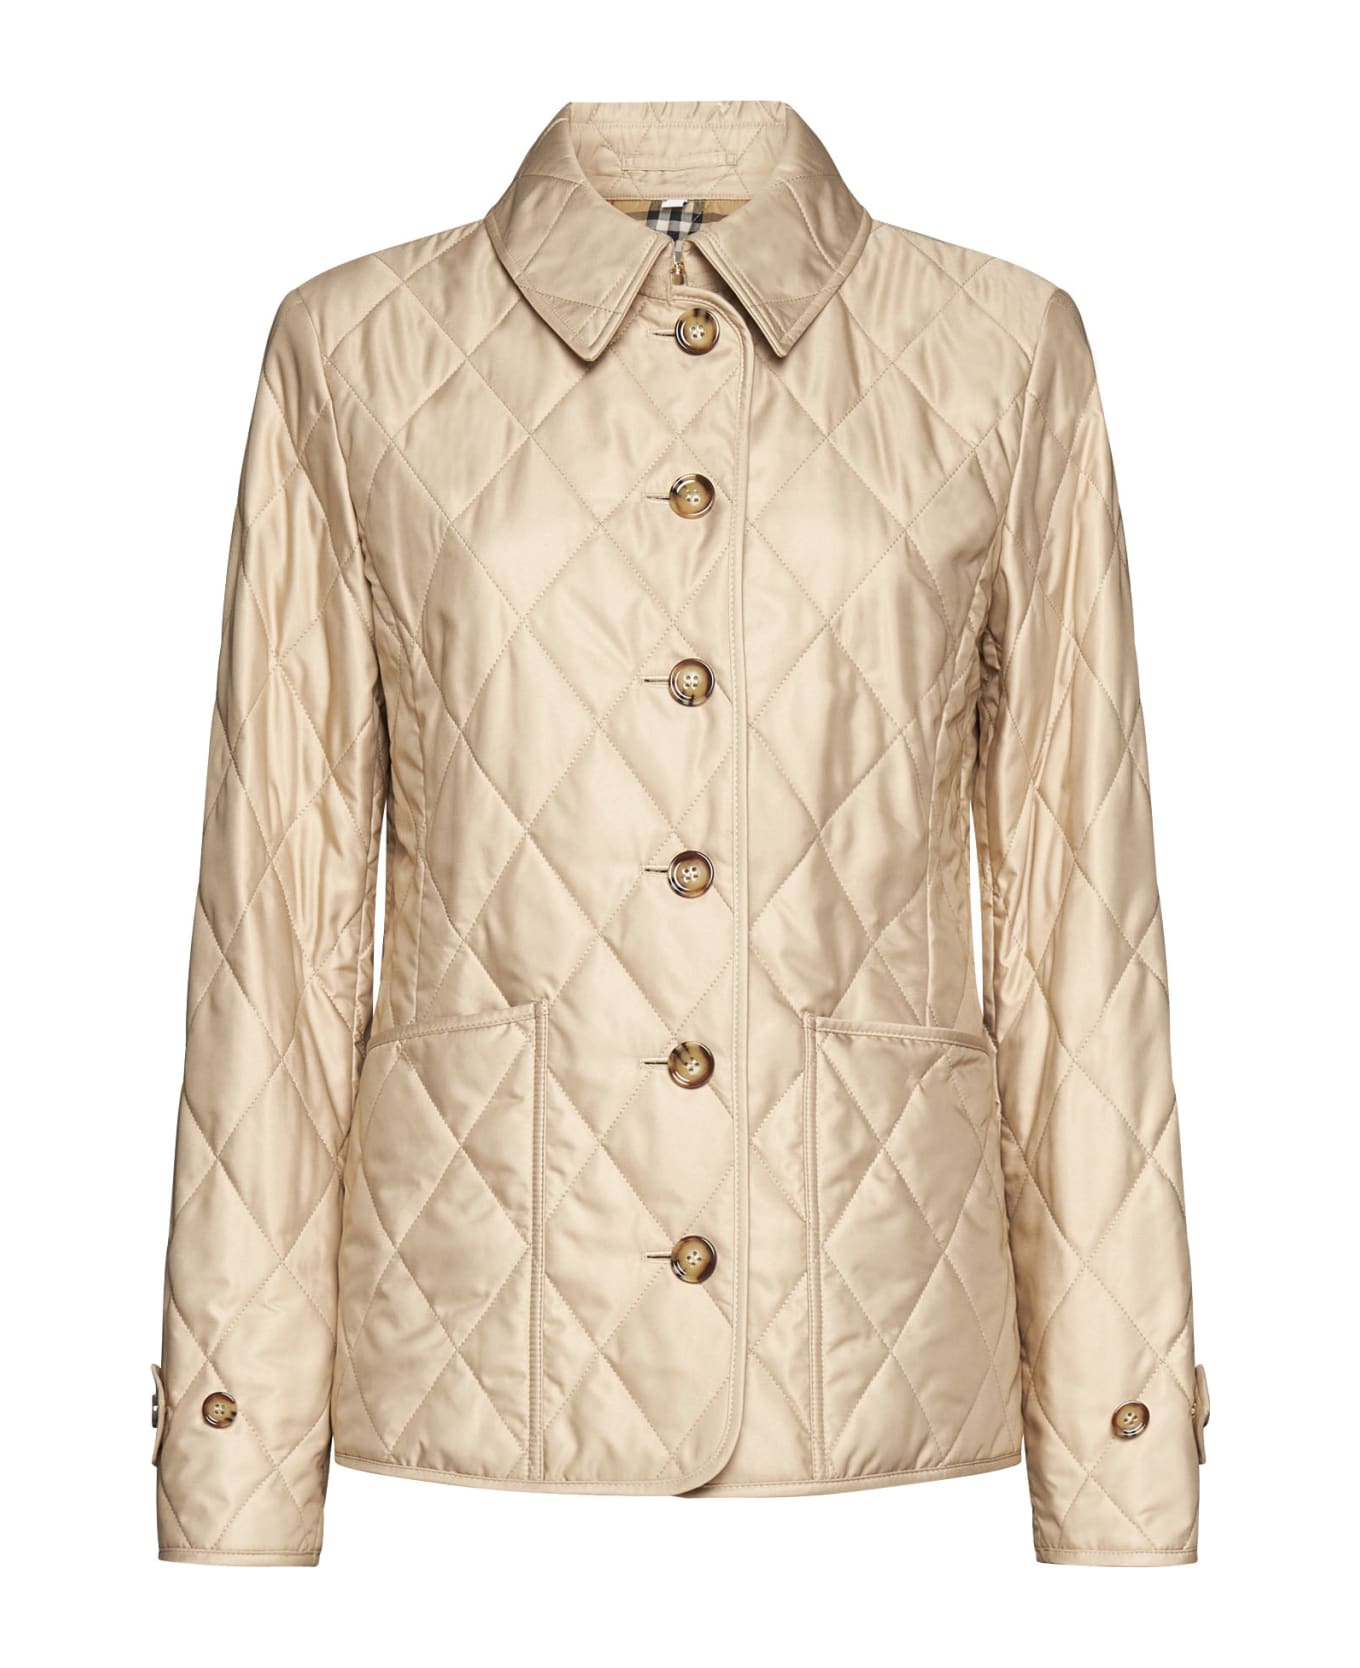 Burberry Diamond Quilted Jacket - New chino